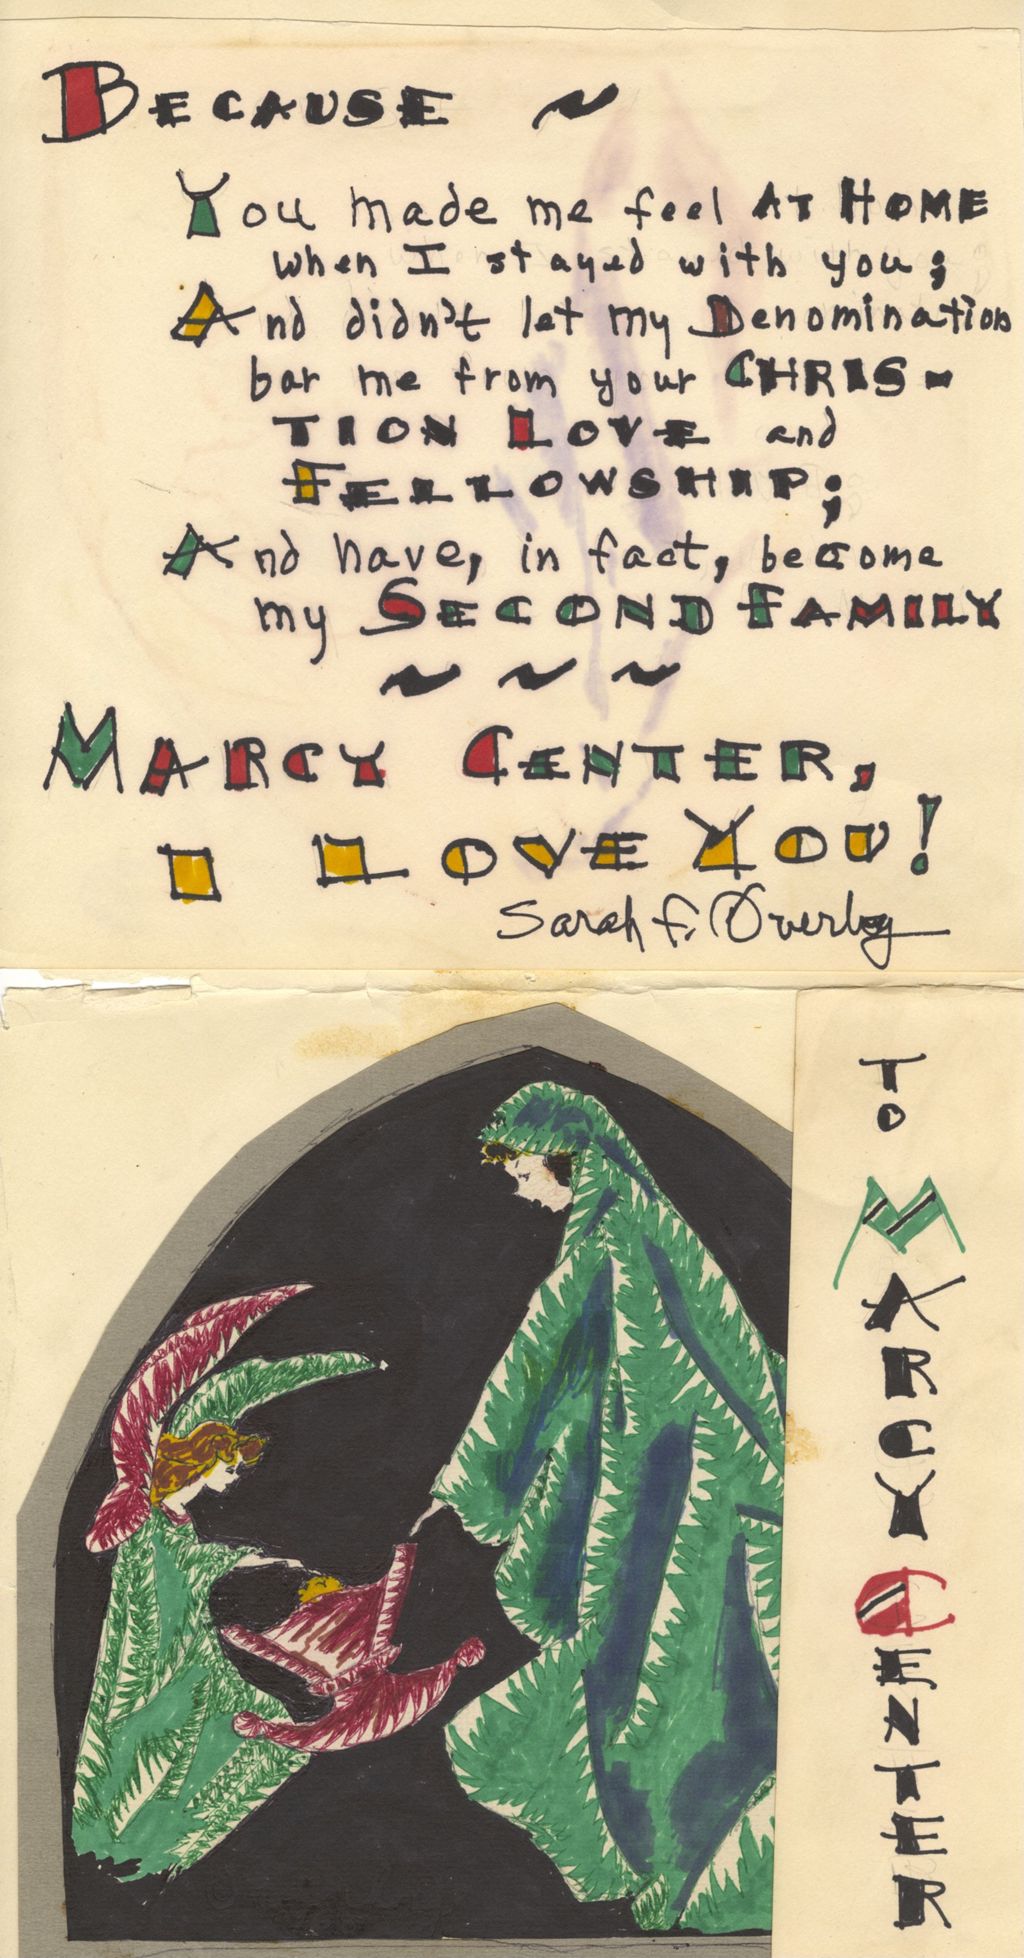 Hand-made Christmas card sent to Marcy Center